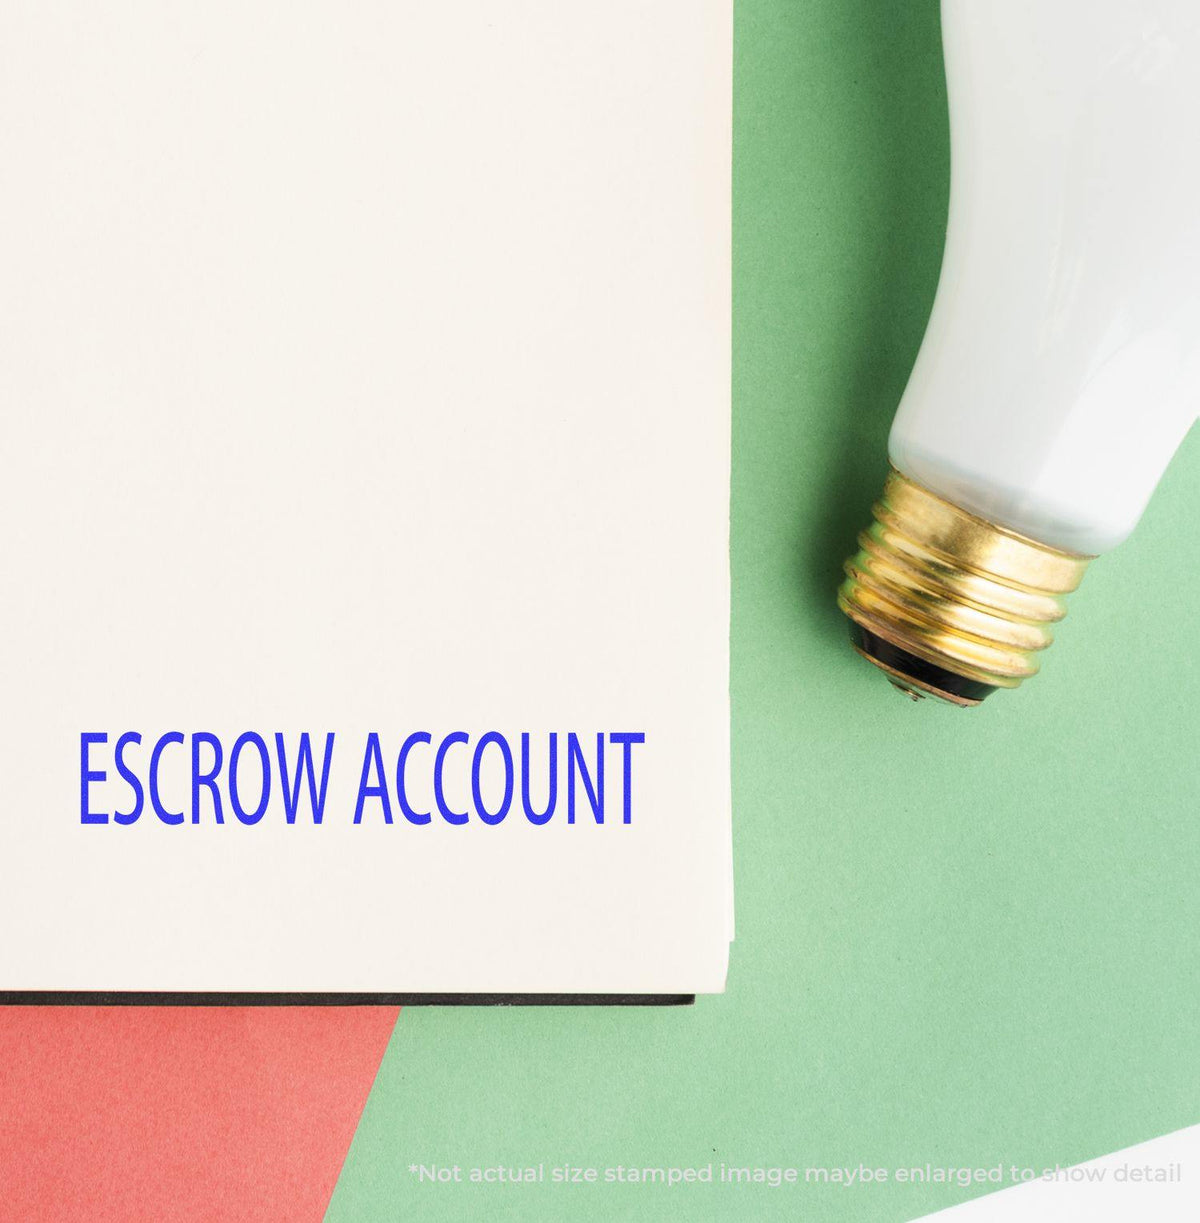 Escrow Account Rubber Stamp In Use Photo